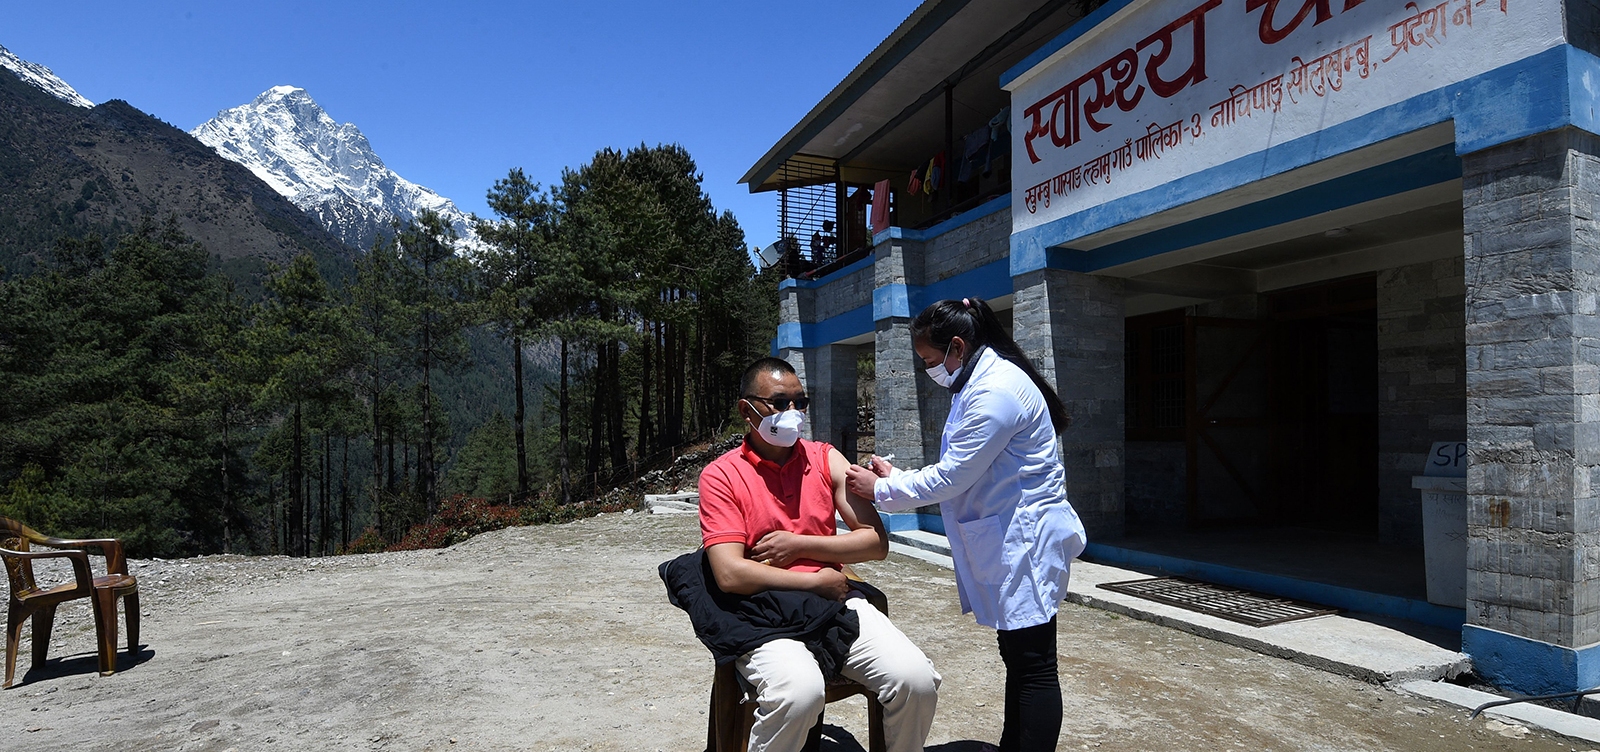 15-million-people-in-nepal-unable-to-get-second-covid-19-vaccine-dose-as-india-curbs-exports